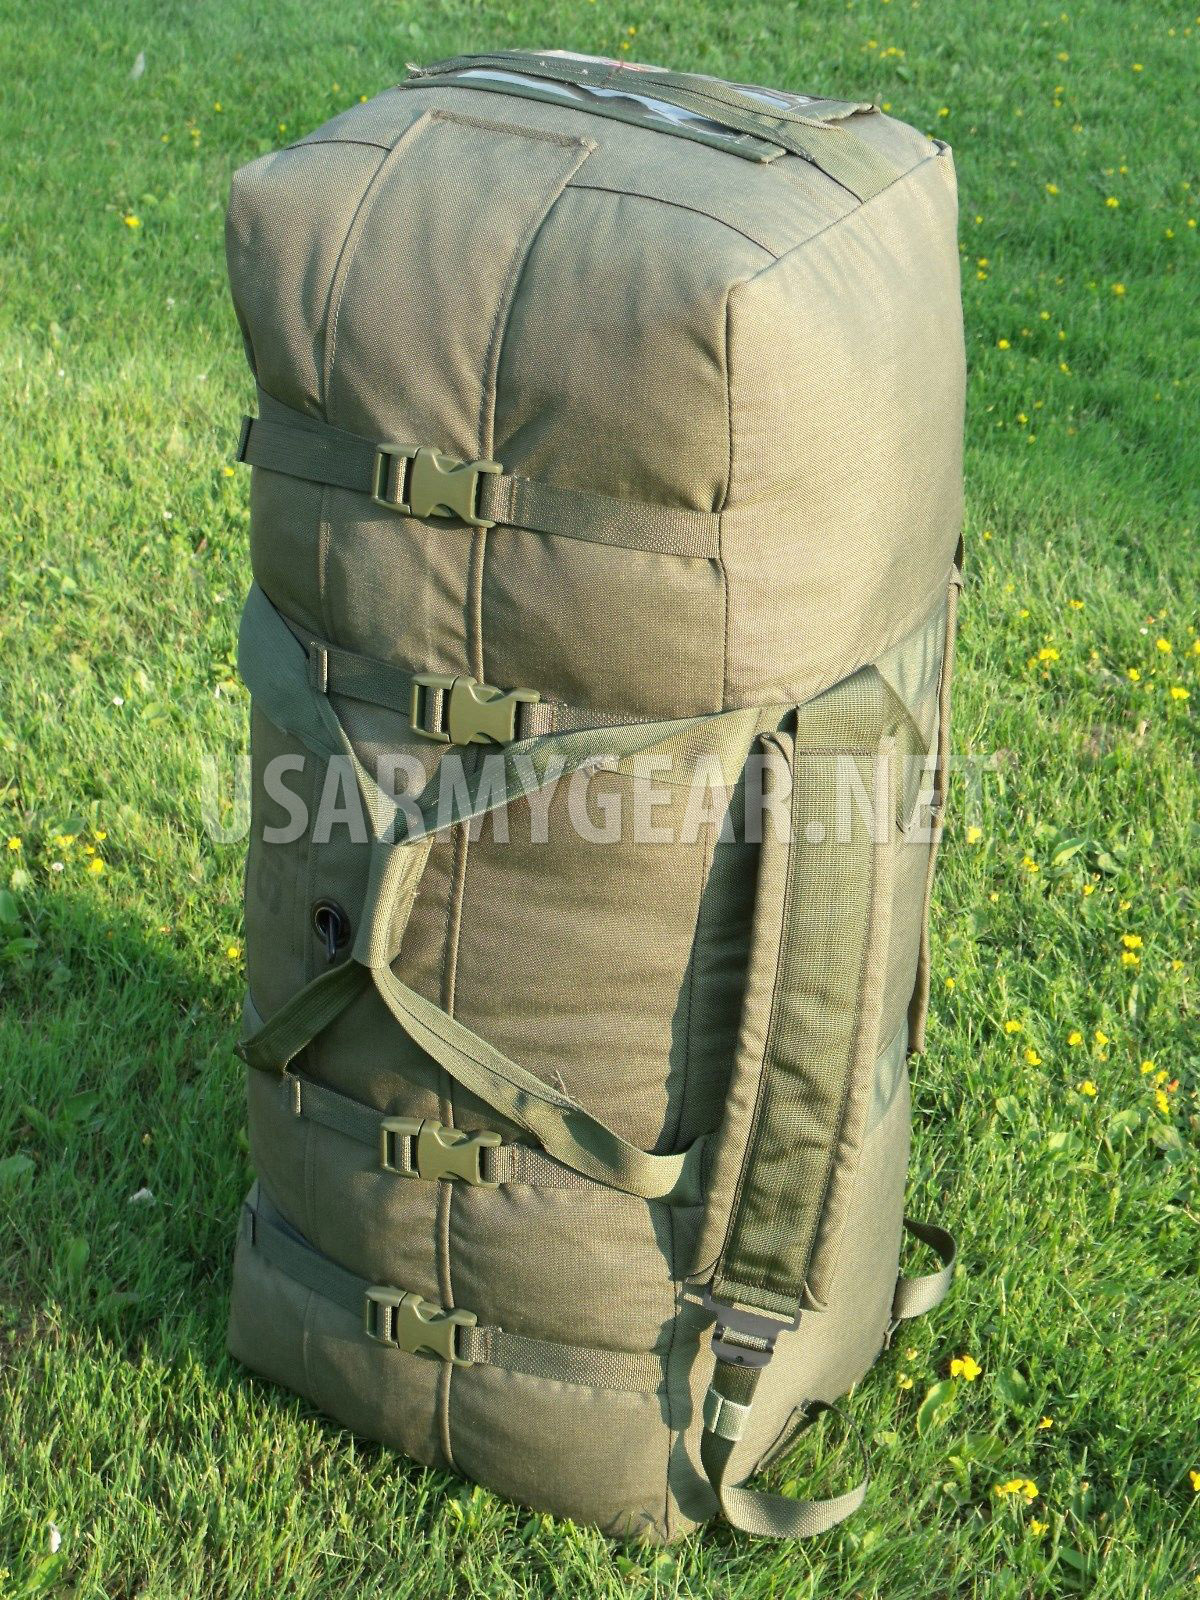 OD Deployment, Duffle Bag, Backpack w. Co. Straps | US Army Gear